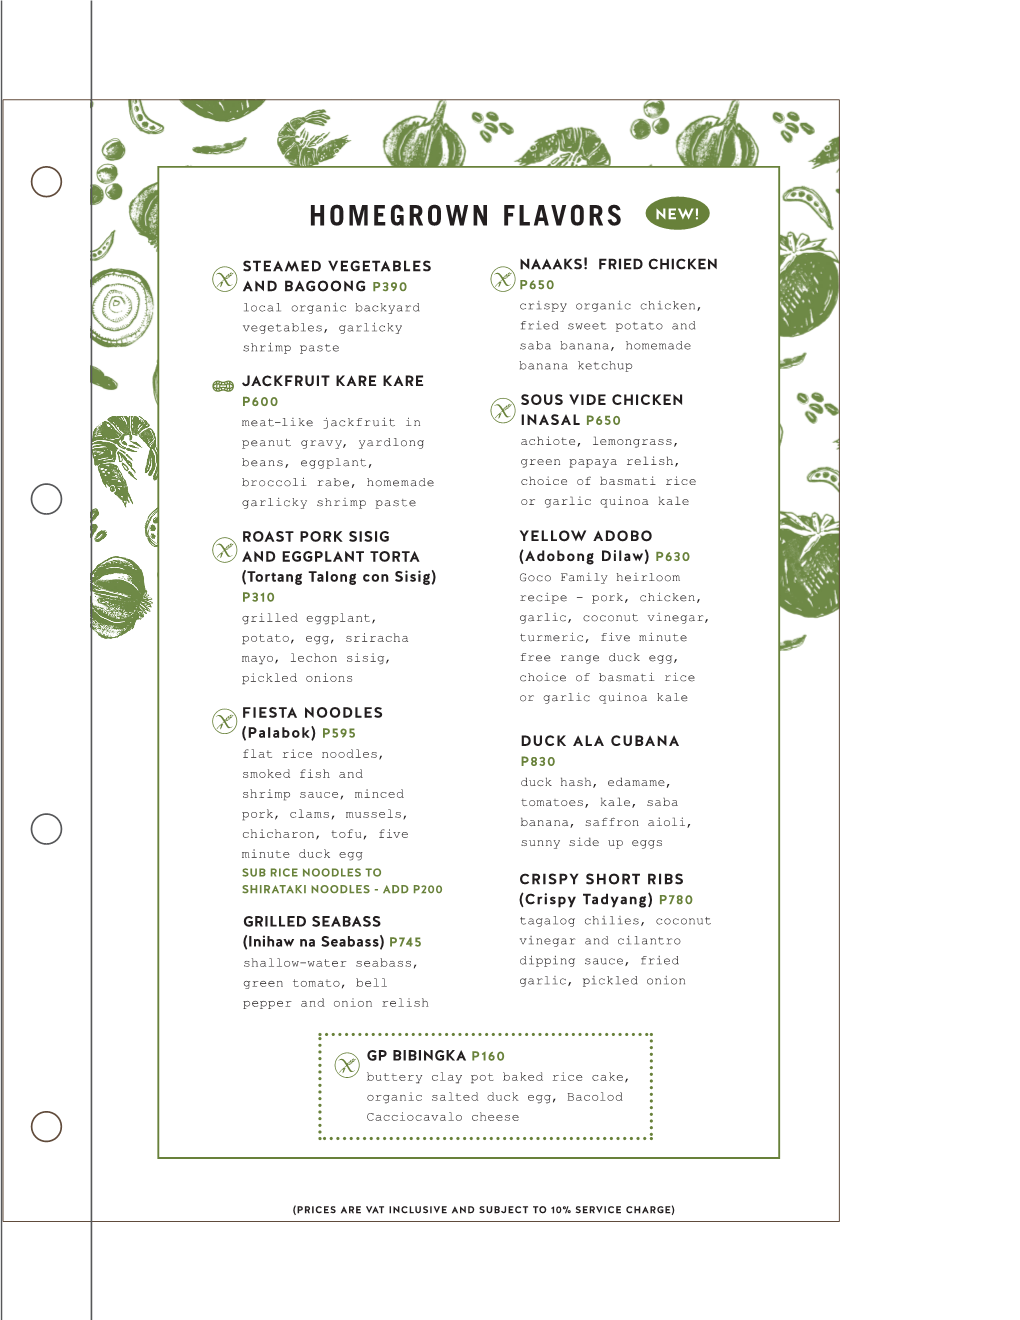 Homegrown Flavors New!